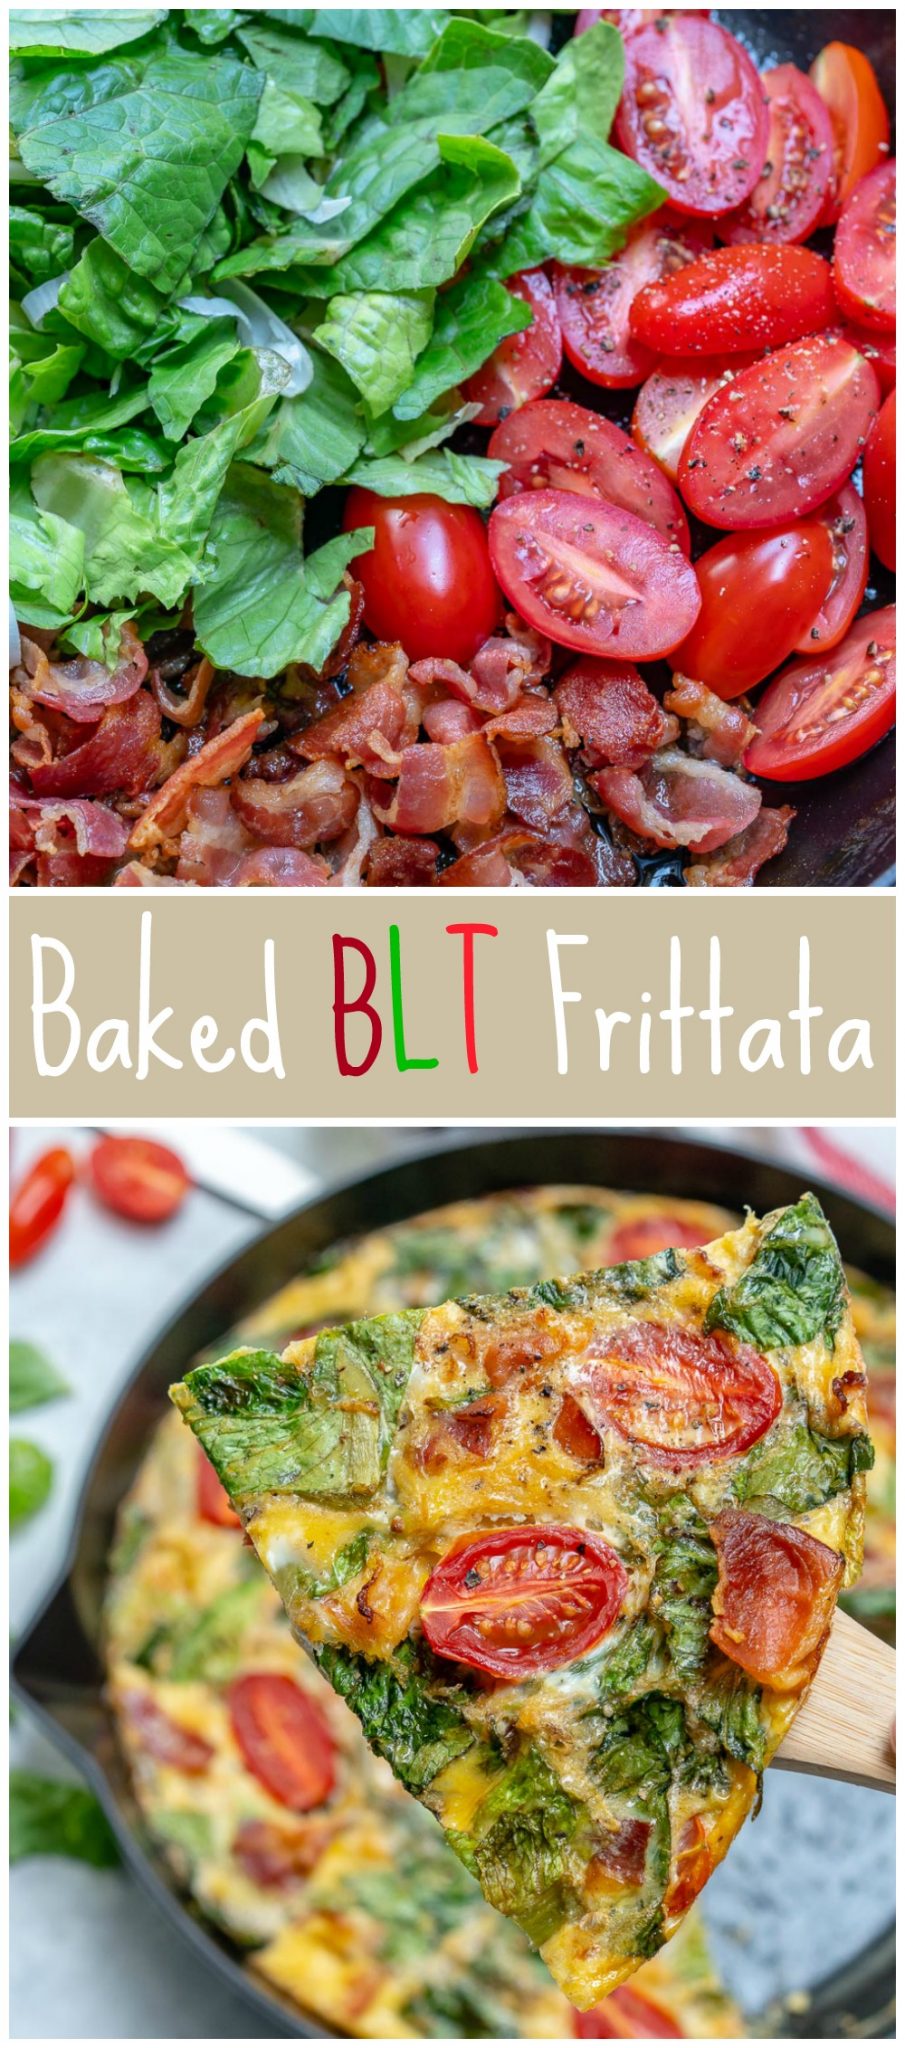 Baked BLT Frittata Clean Food